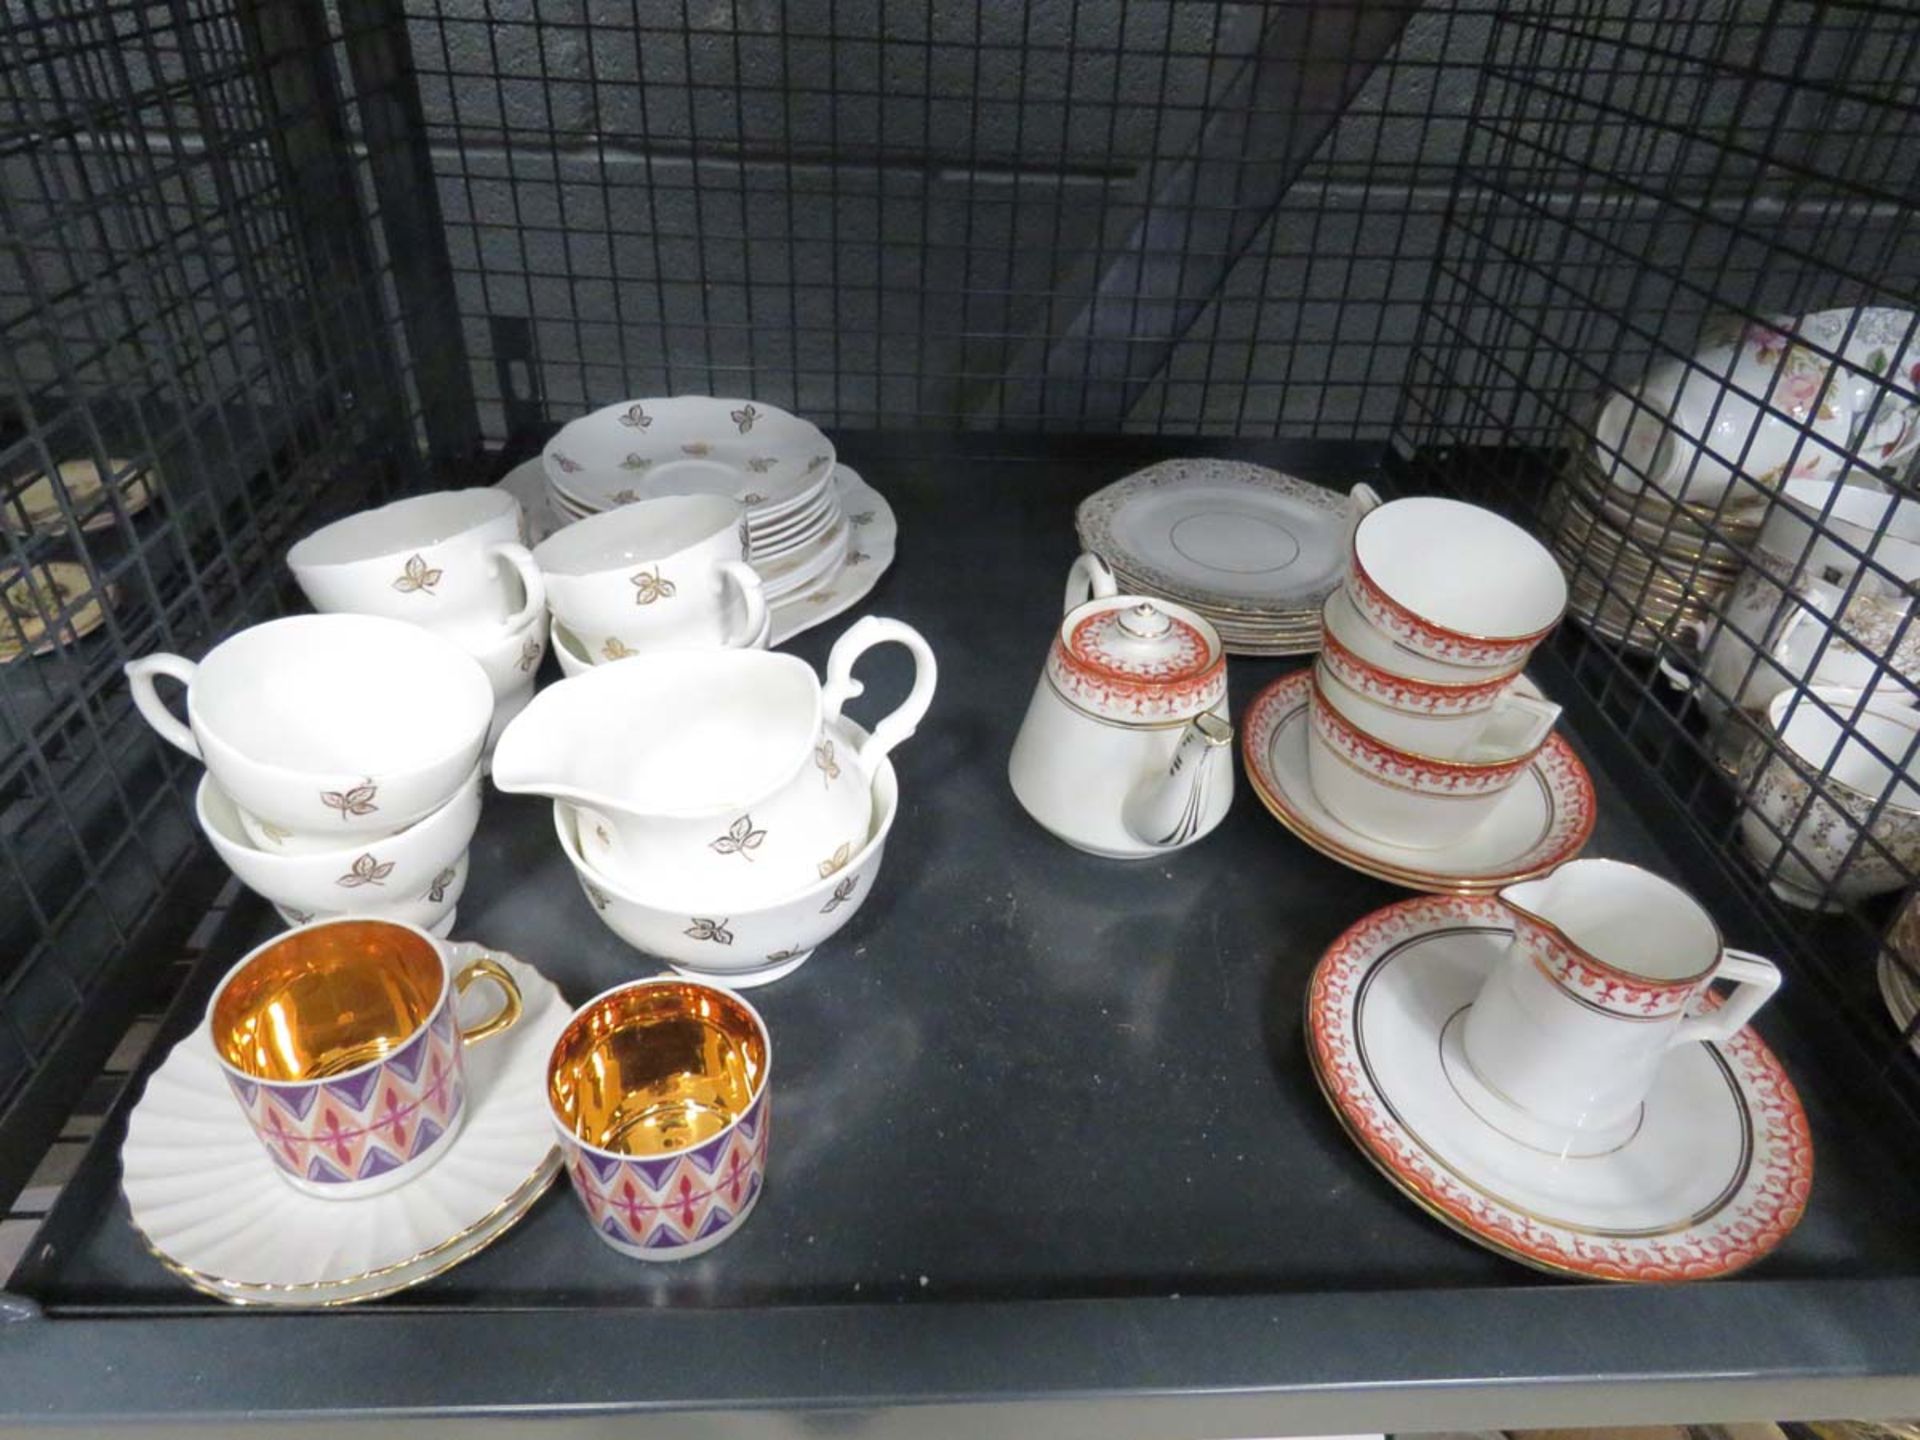 Cage containing Duchess floral patterned crockery plus Shelley cups and saucers